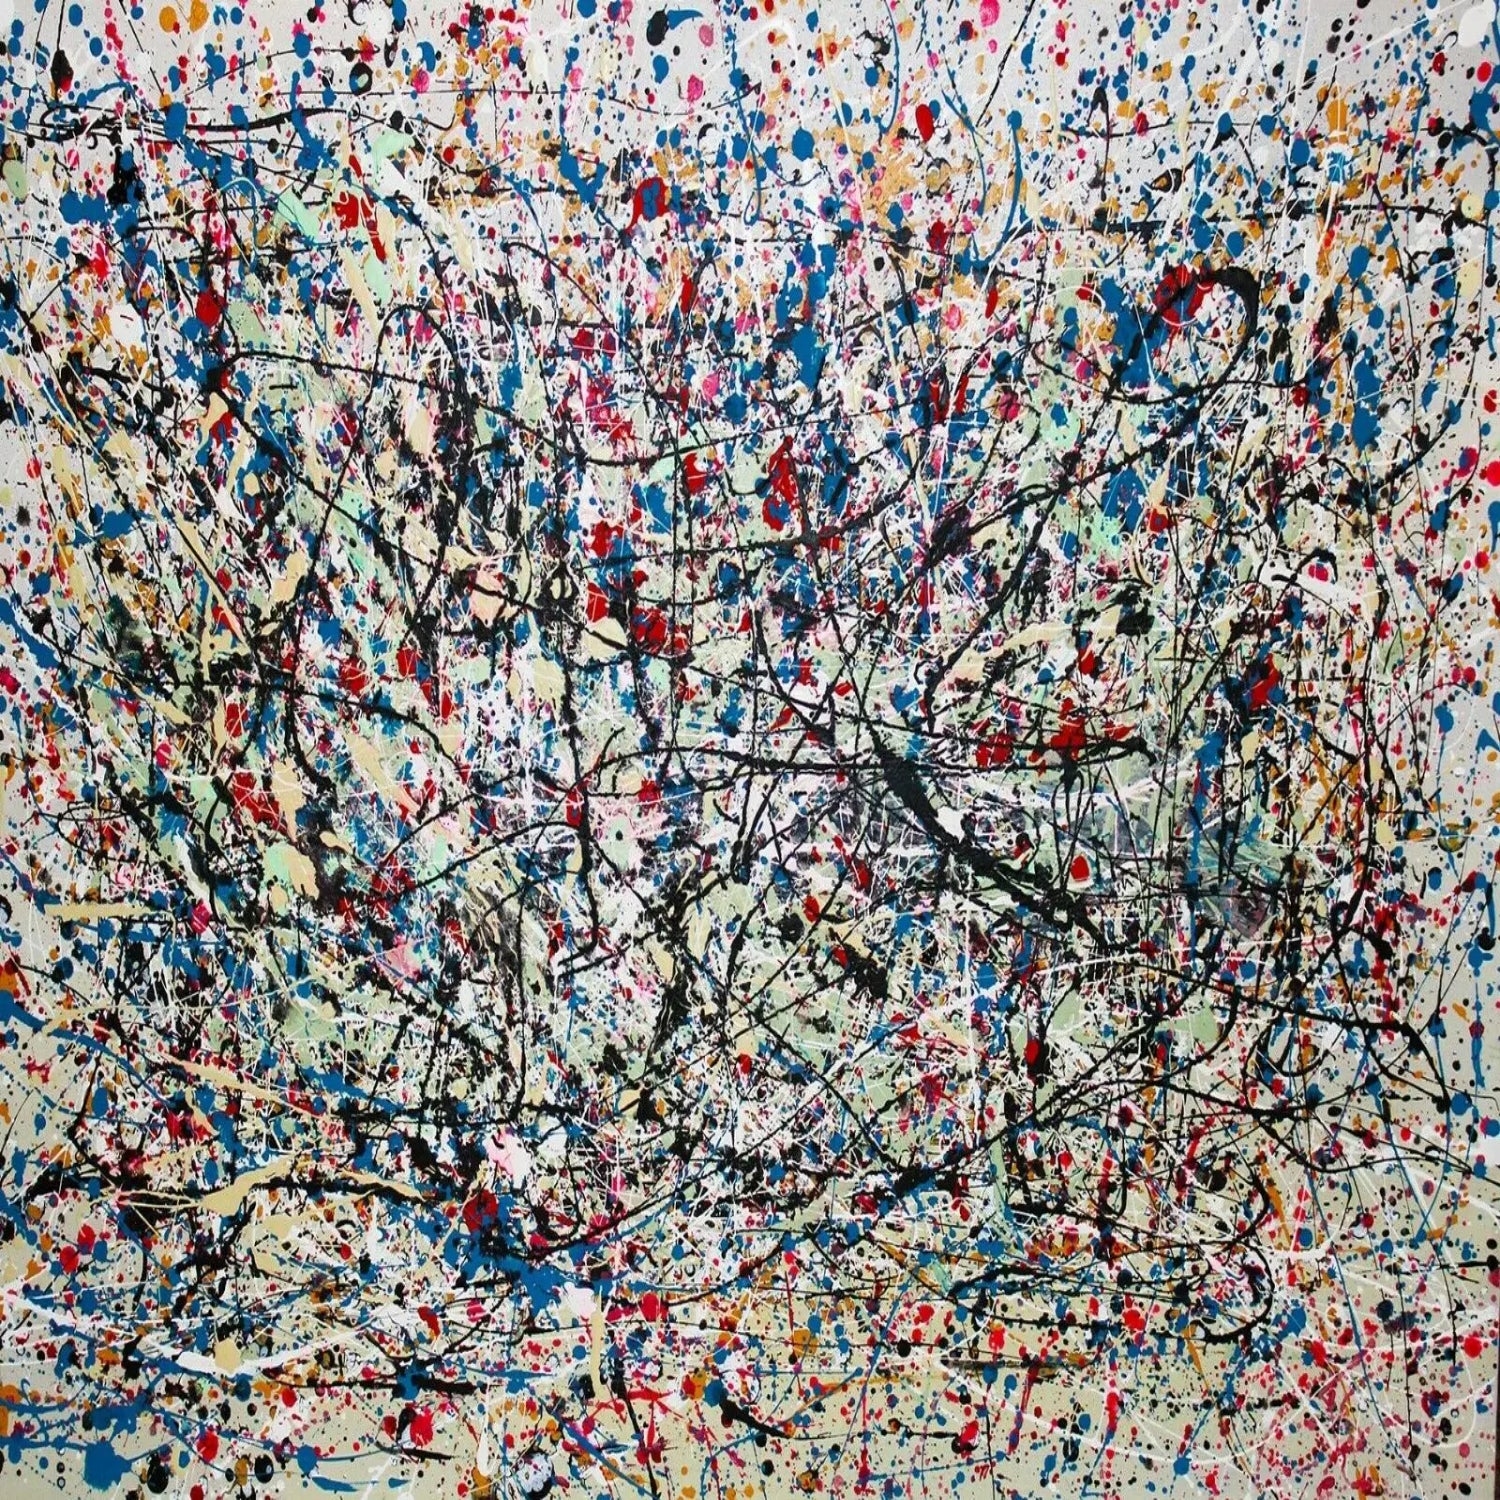 Abstract Colourful Jackson Pollock Style Painting